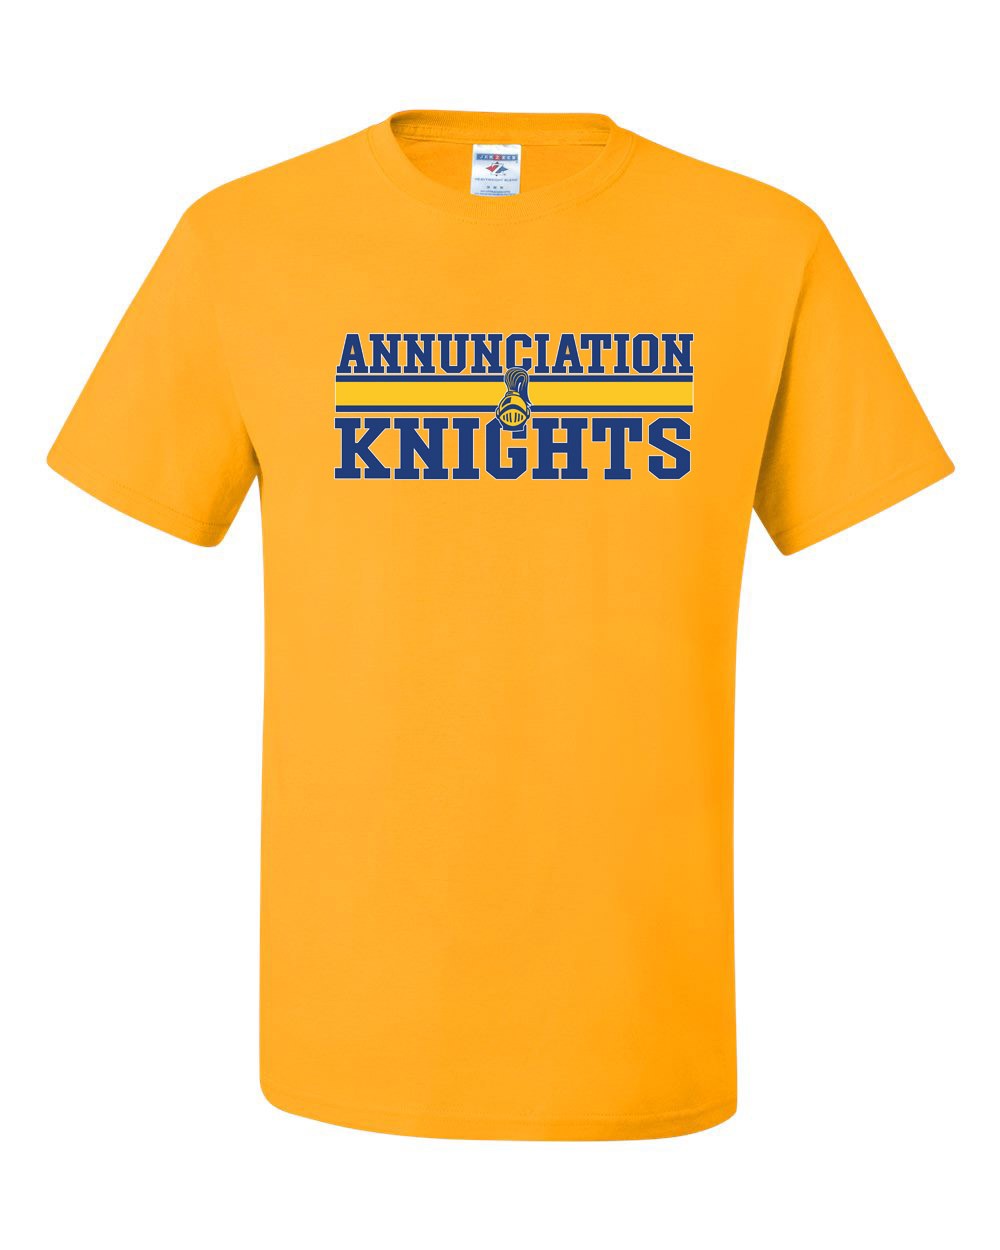 ANN Spirit S/S T-shirt w/ Annunciation Knights Logo - Please Allow 2-3 Weeks for Delivery